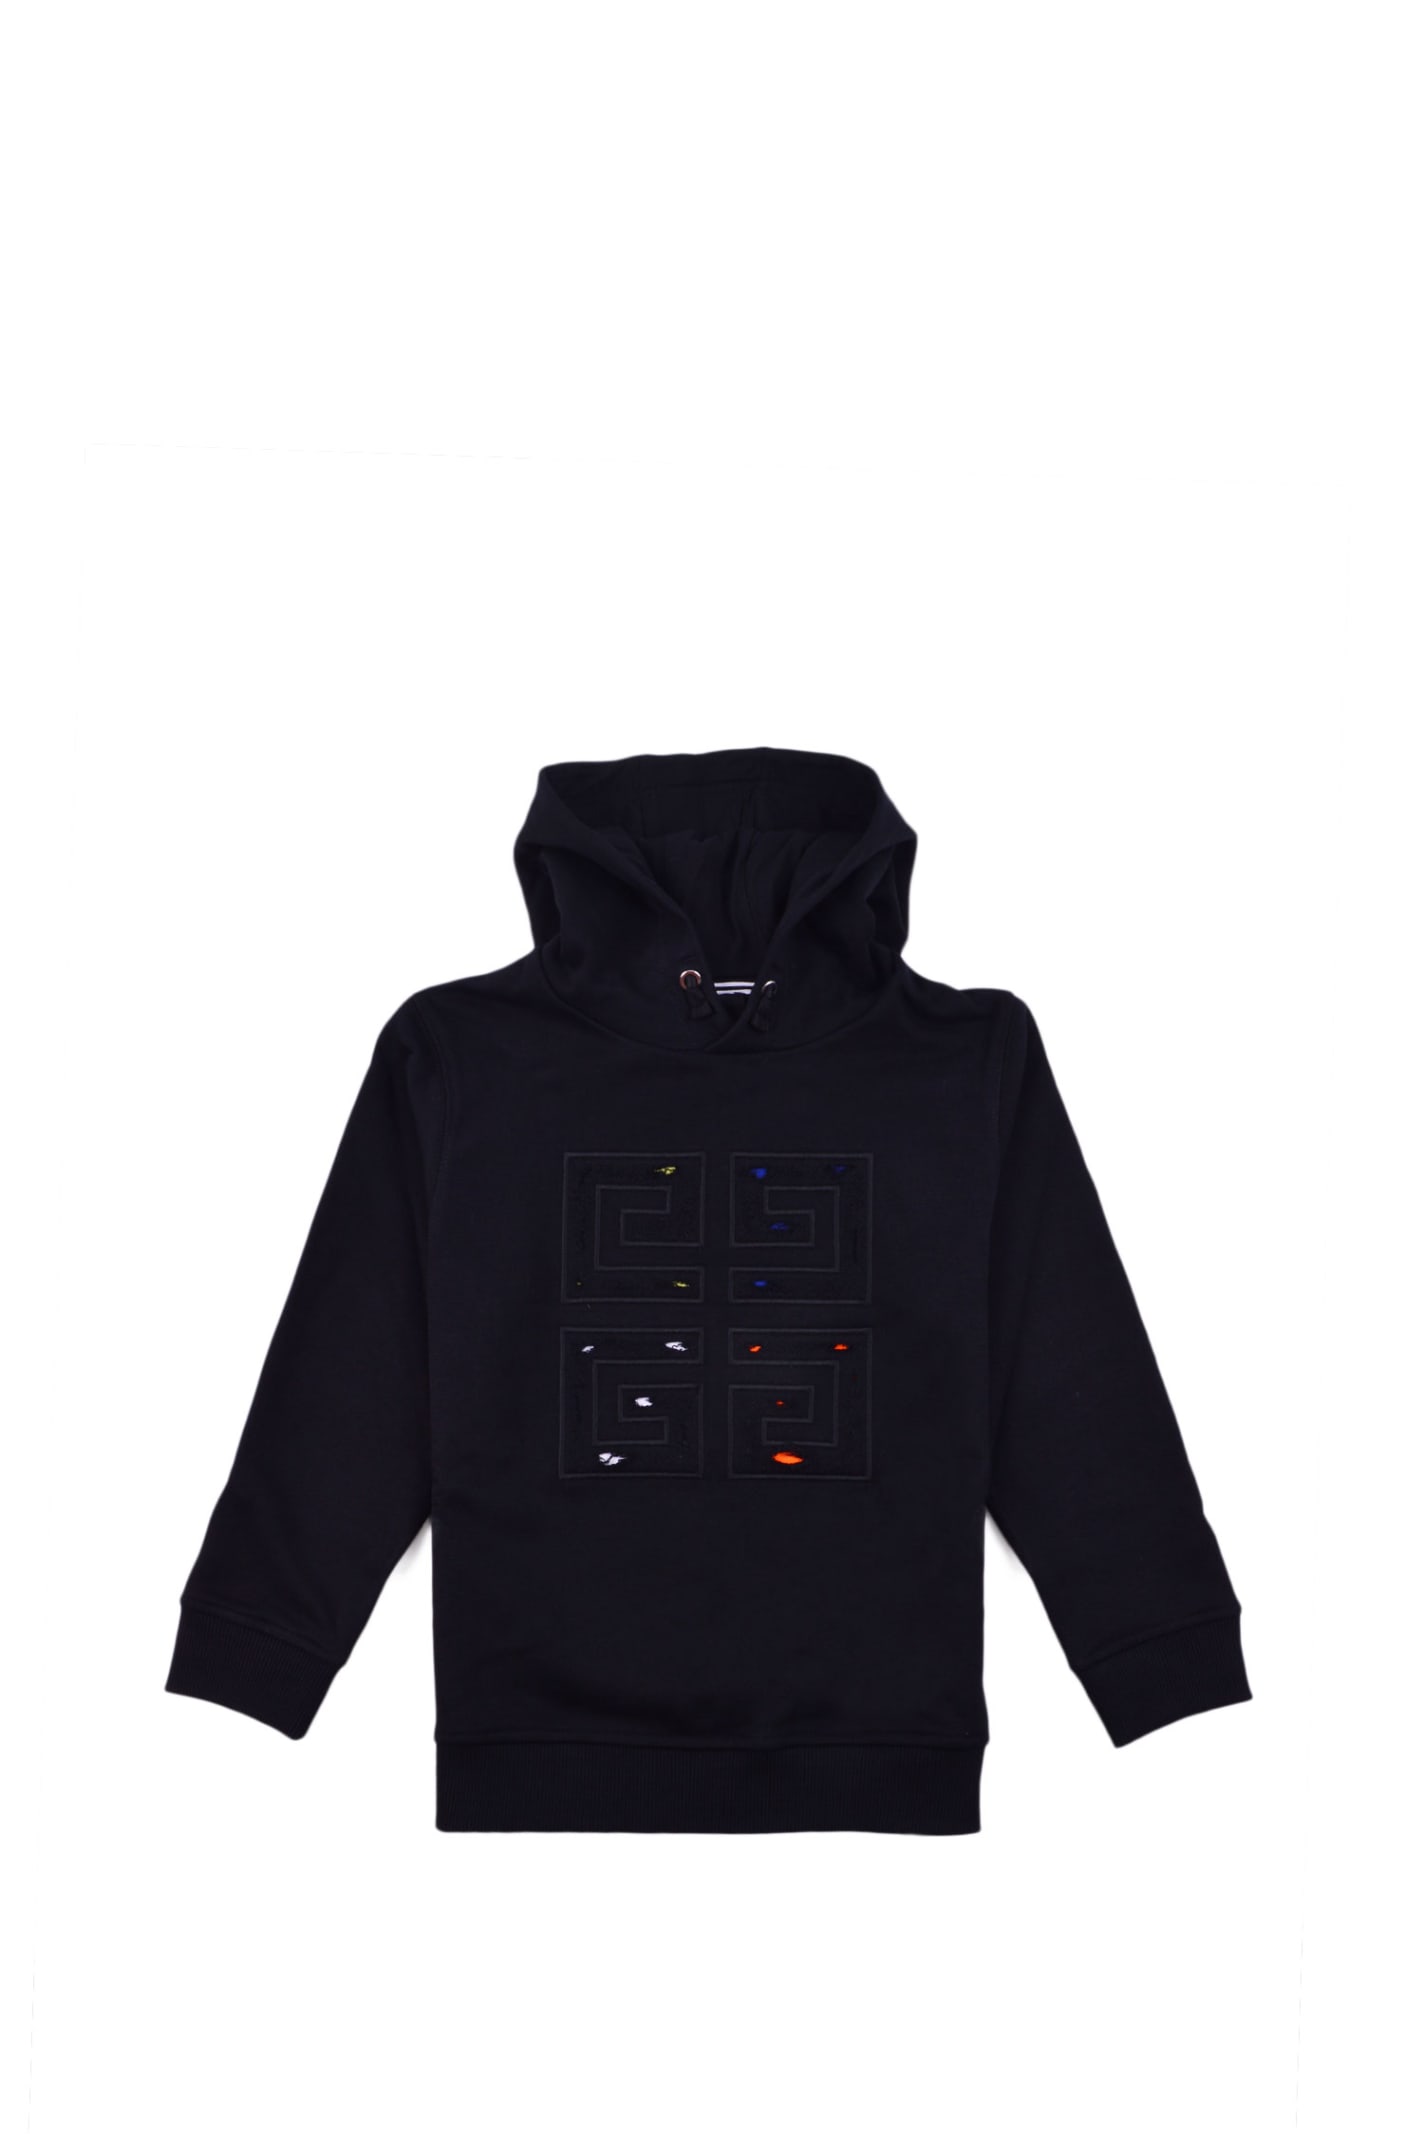 Givenchy Kids' Cotton Sweatshirt With Hood In Back